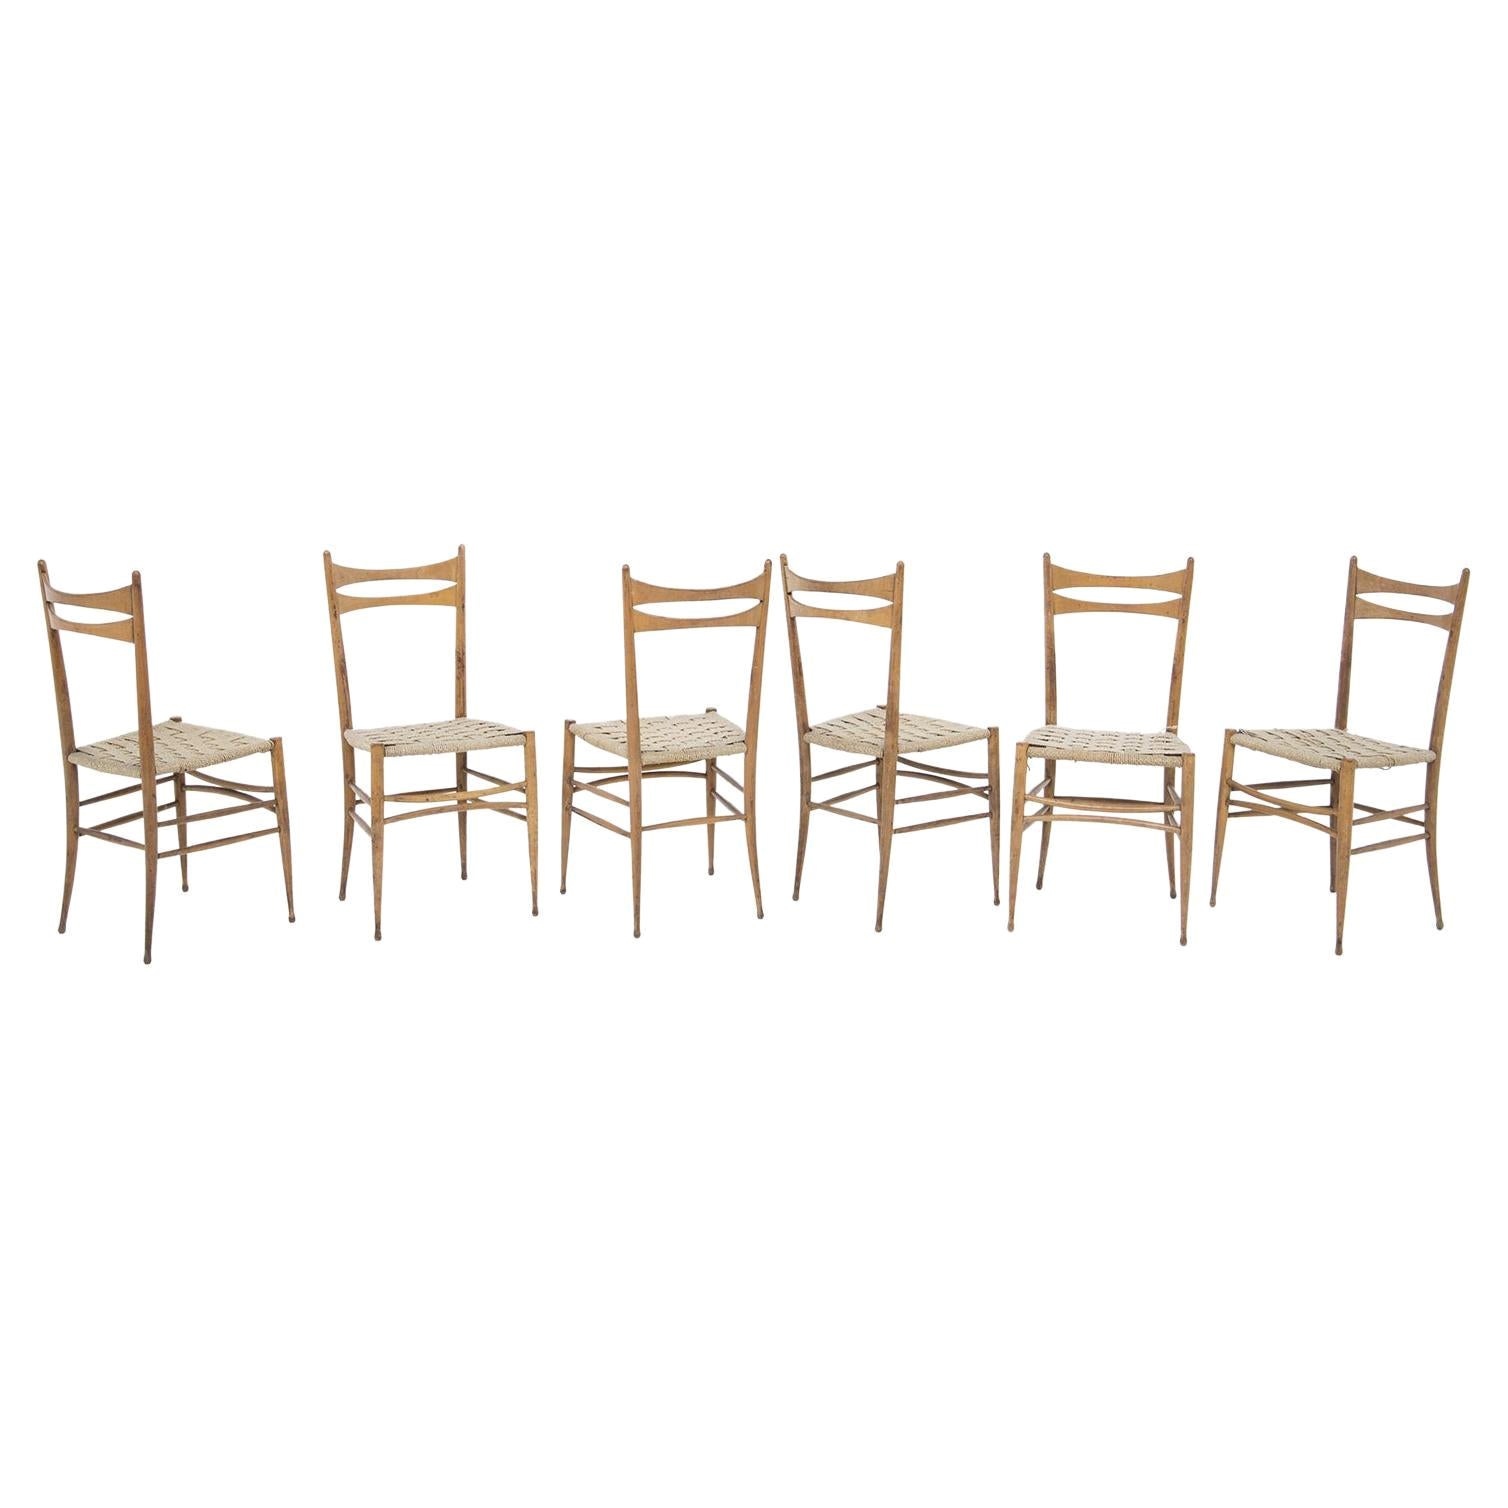 Set of Six Italian Chairs in Rattan and Wood